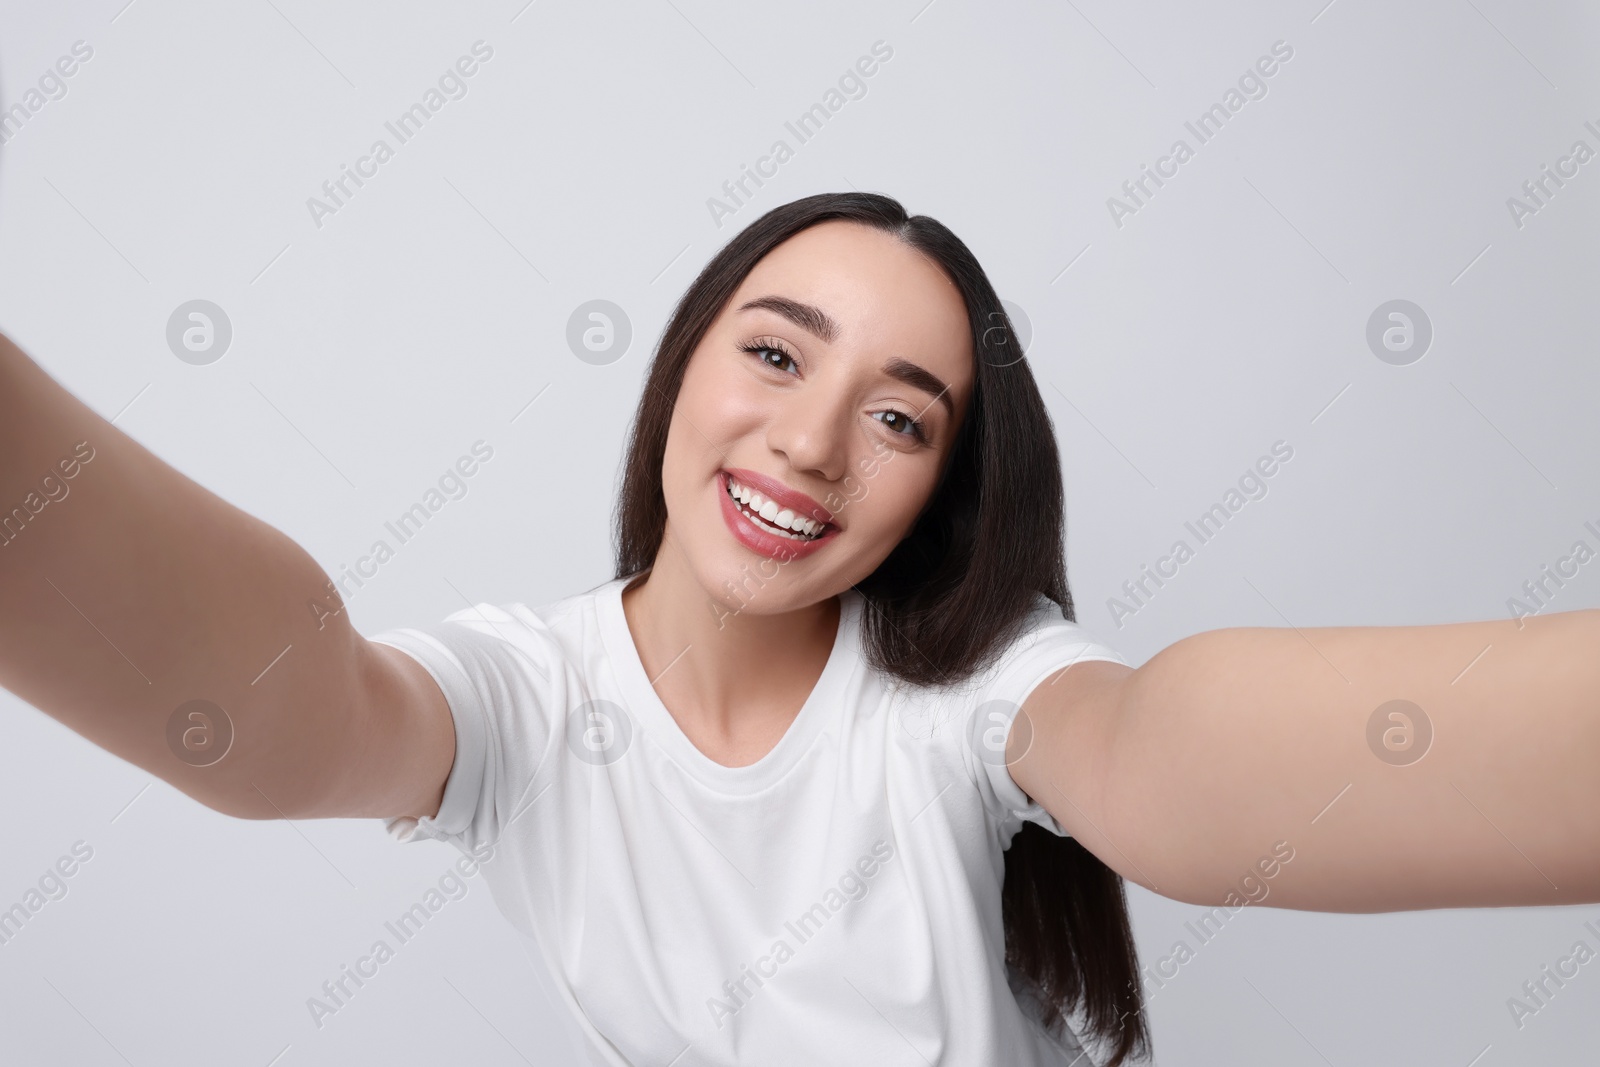 Photo of Smiling young woman taking selfie on white background